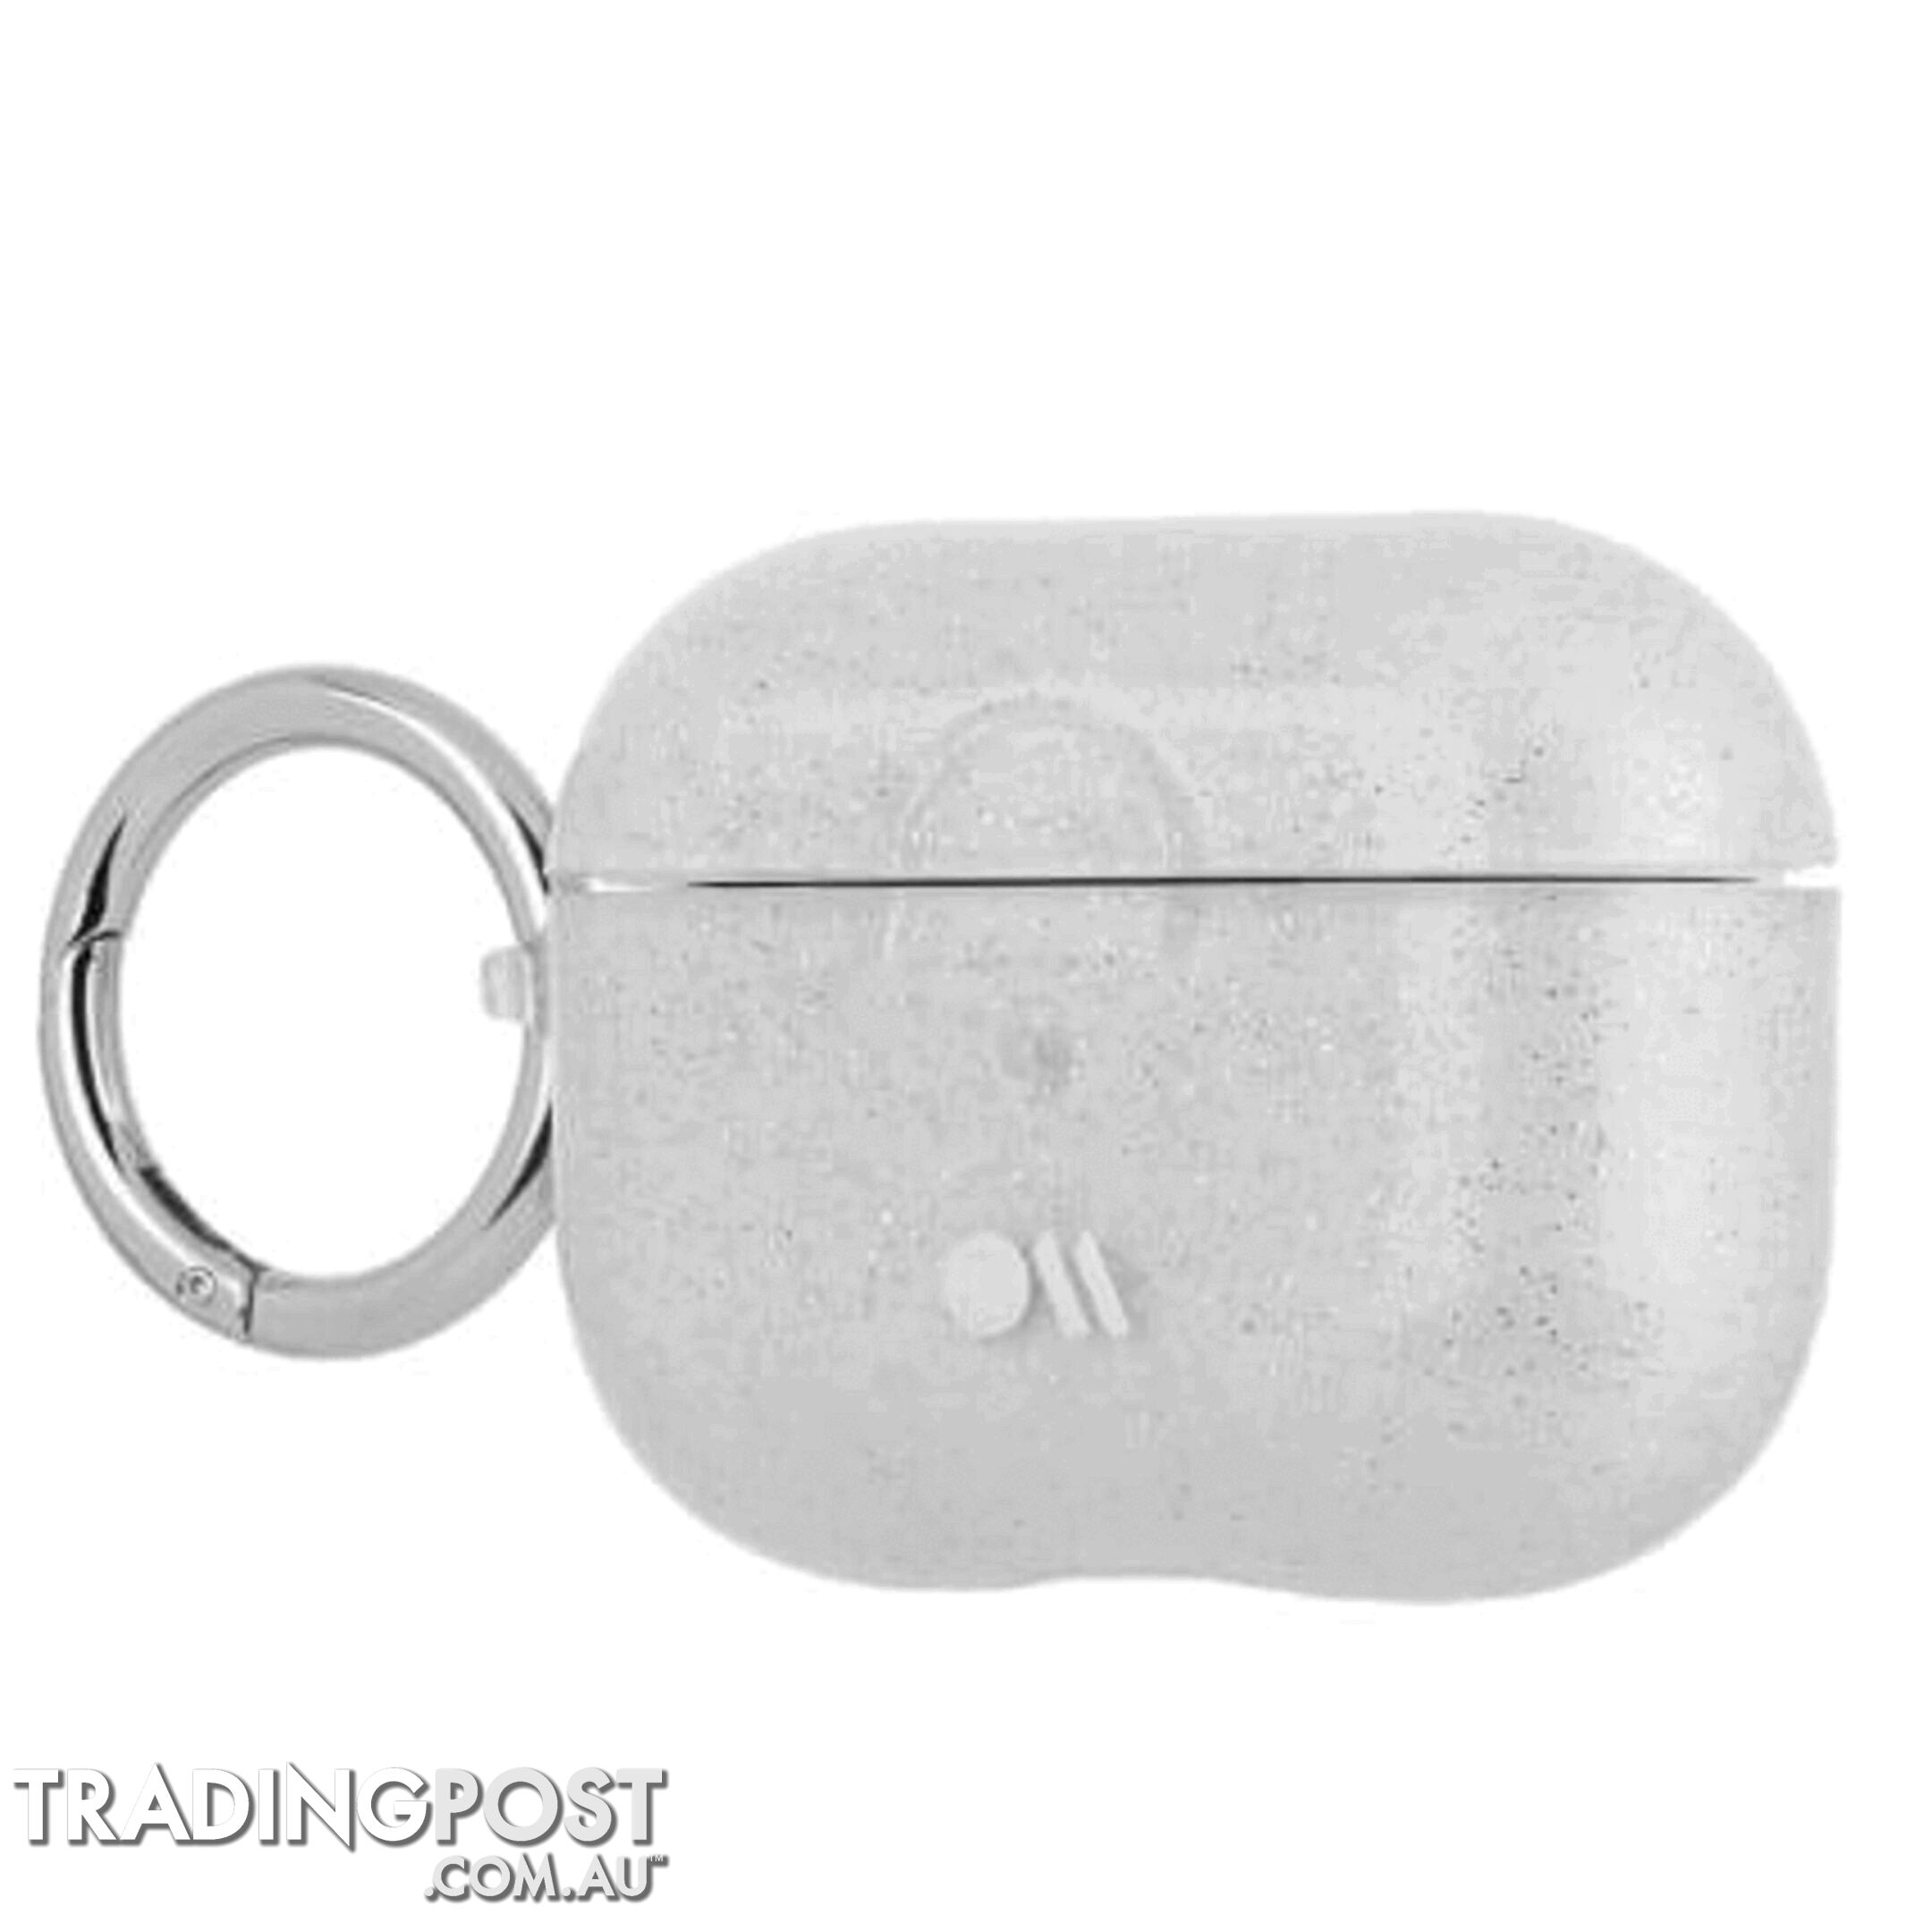 Case-Mate Sheer Crystal Hookups For AirPods PRO - Case-Mate - Clear - 846127191036